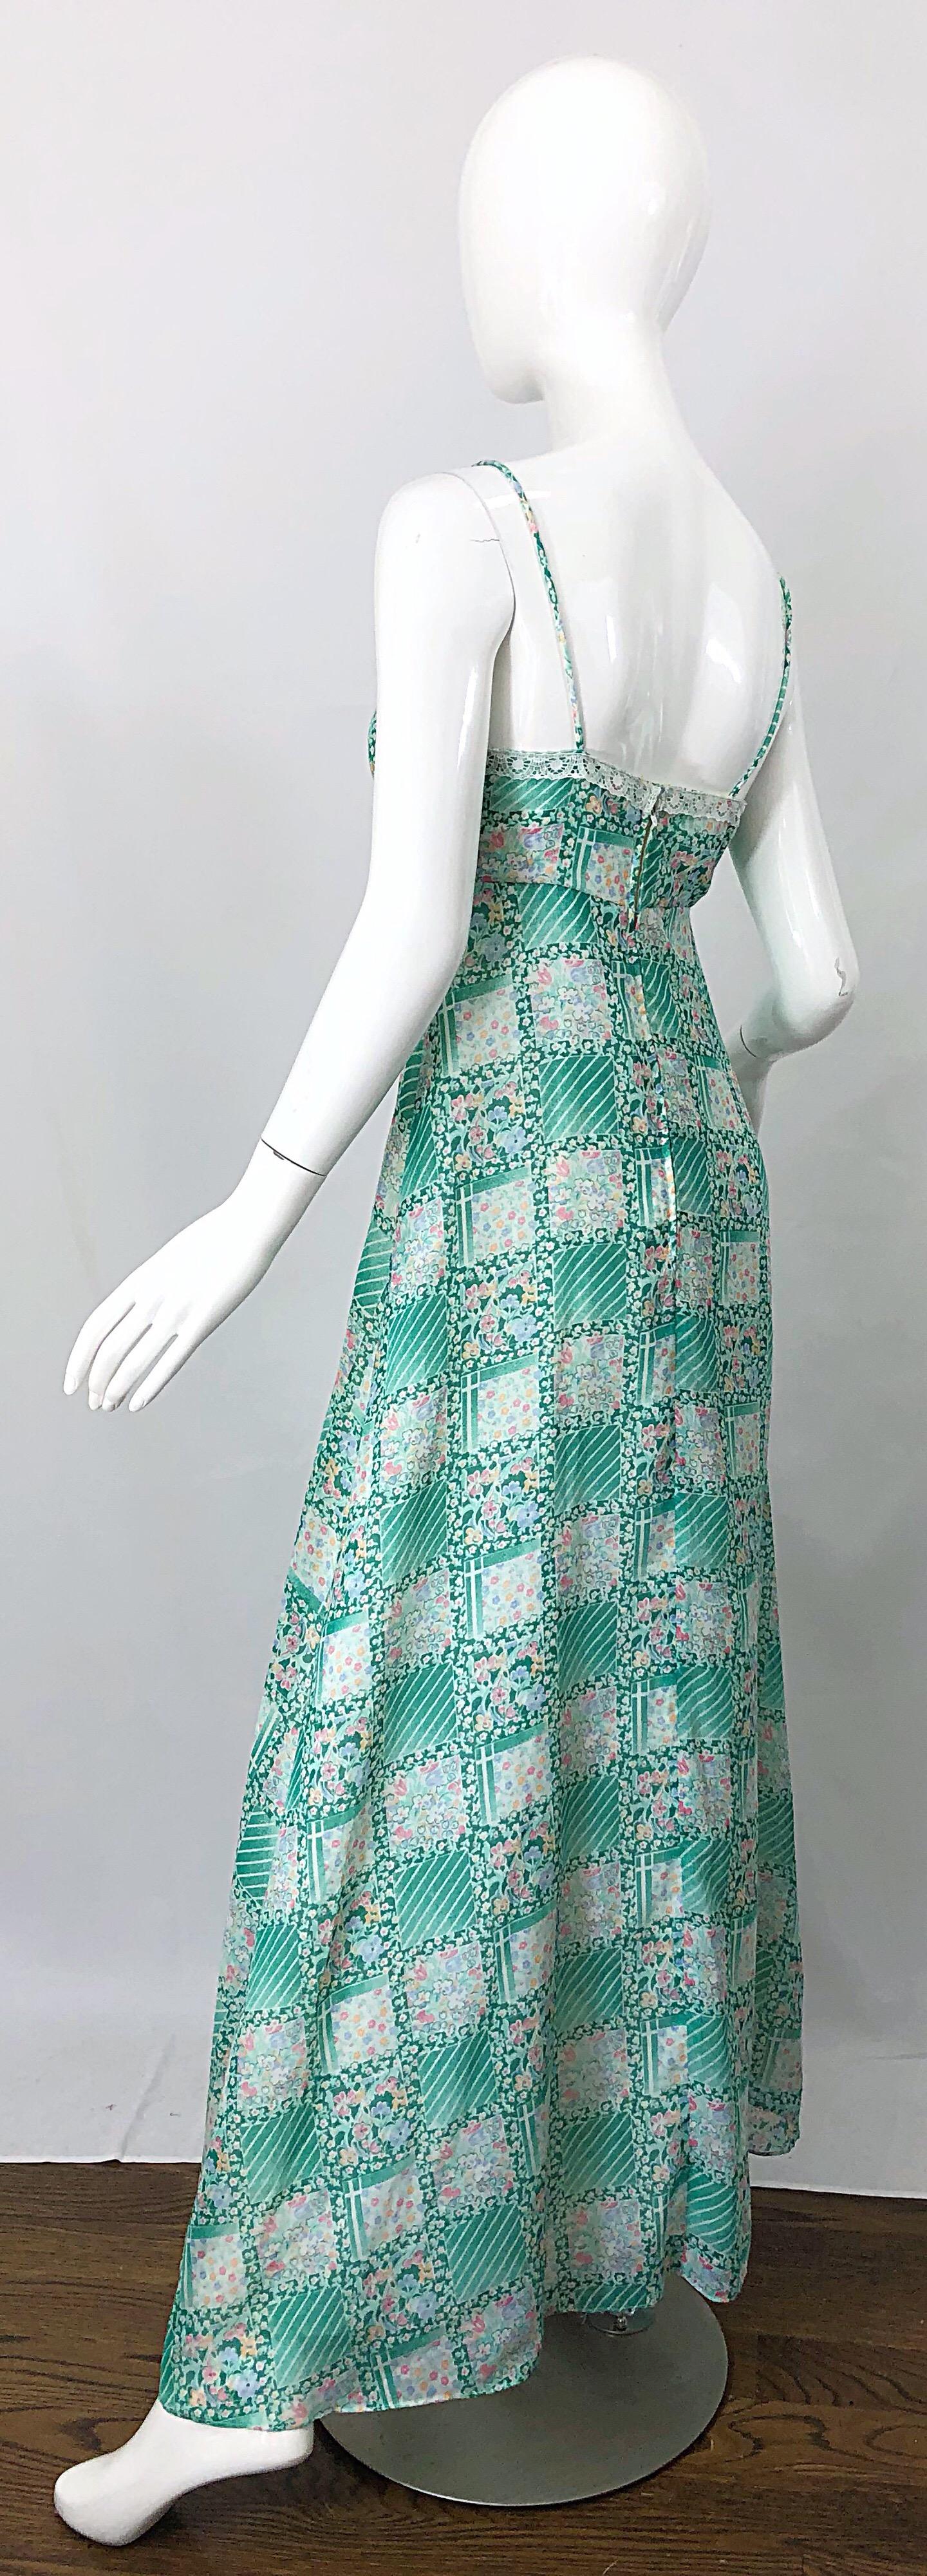 1970s Teal Green Blue Pink Flower Printed Cotton + Lace Vintage 70s Maxi Dress For Sale 5